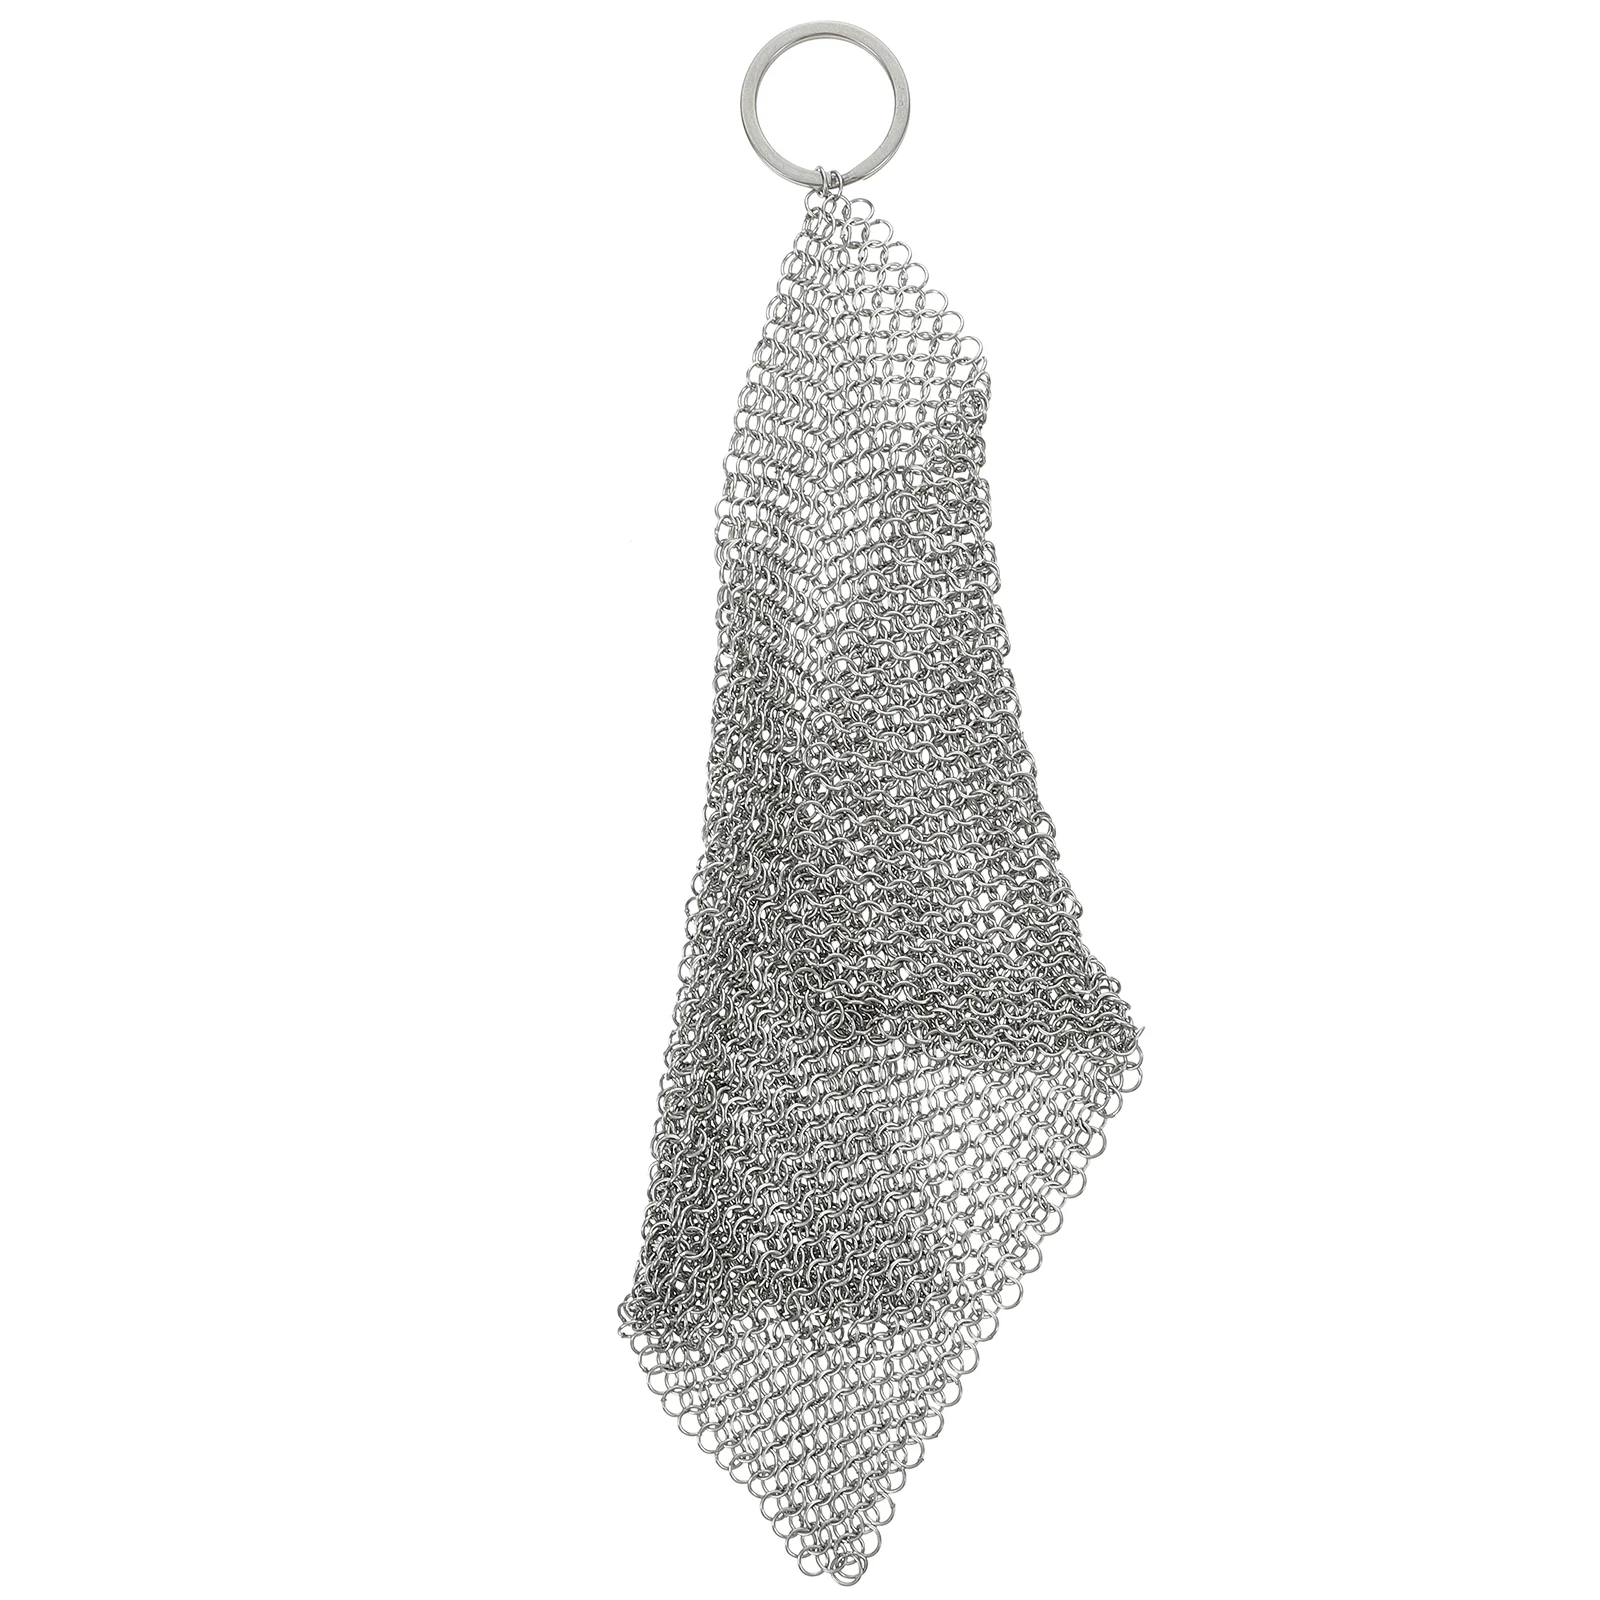 Stainless steel scrubbers